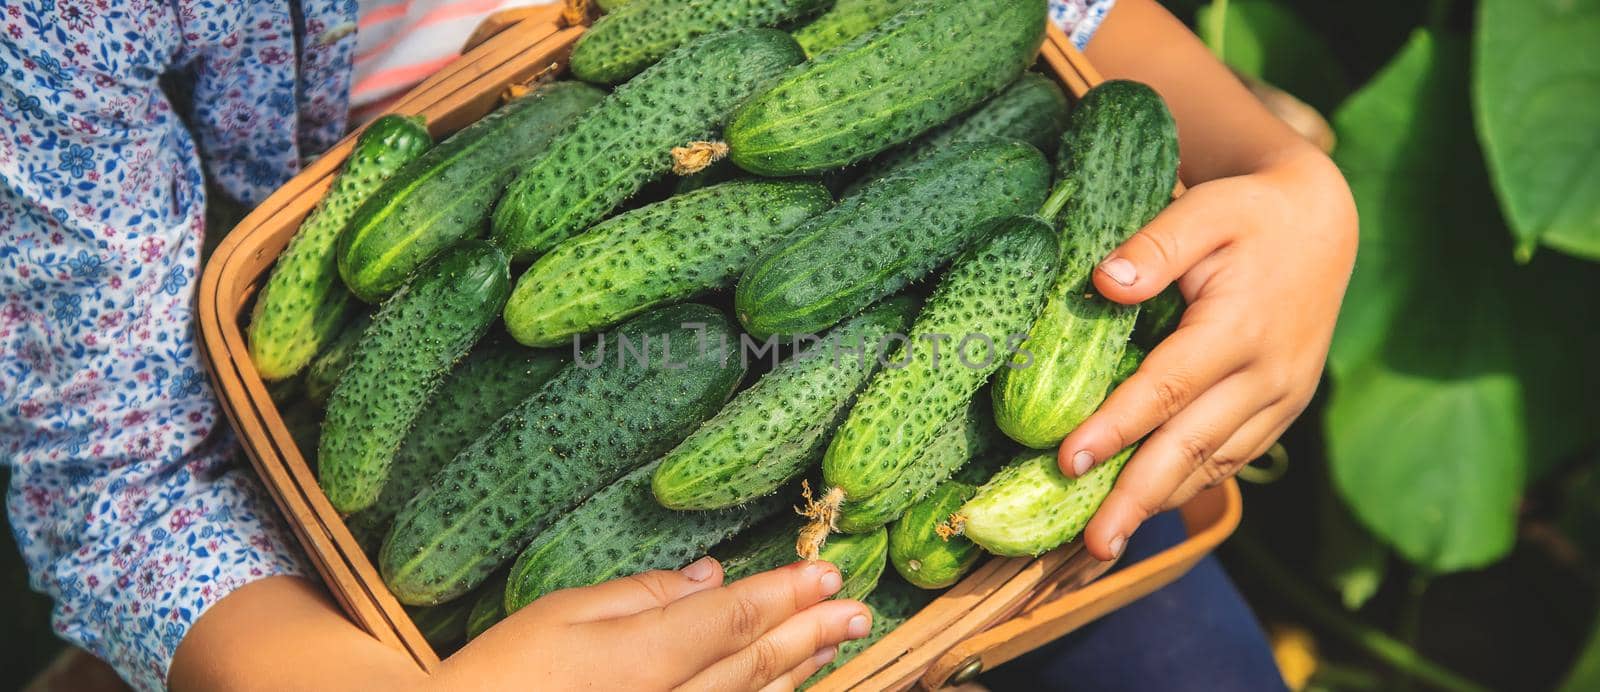 homemade cucumber cultivation and harvest in the hands of a child. selective focus. nature.